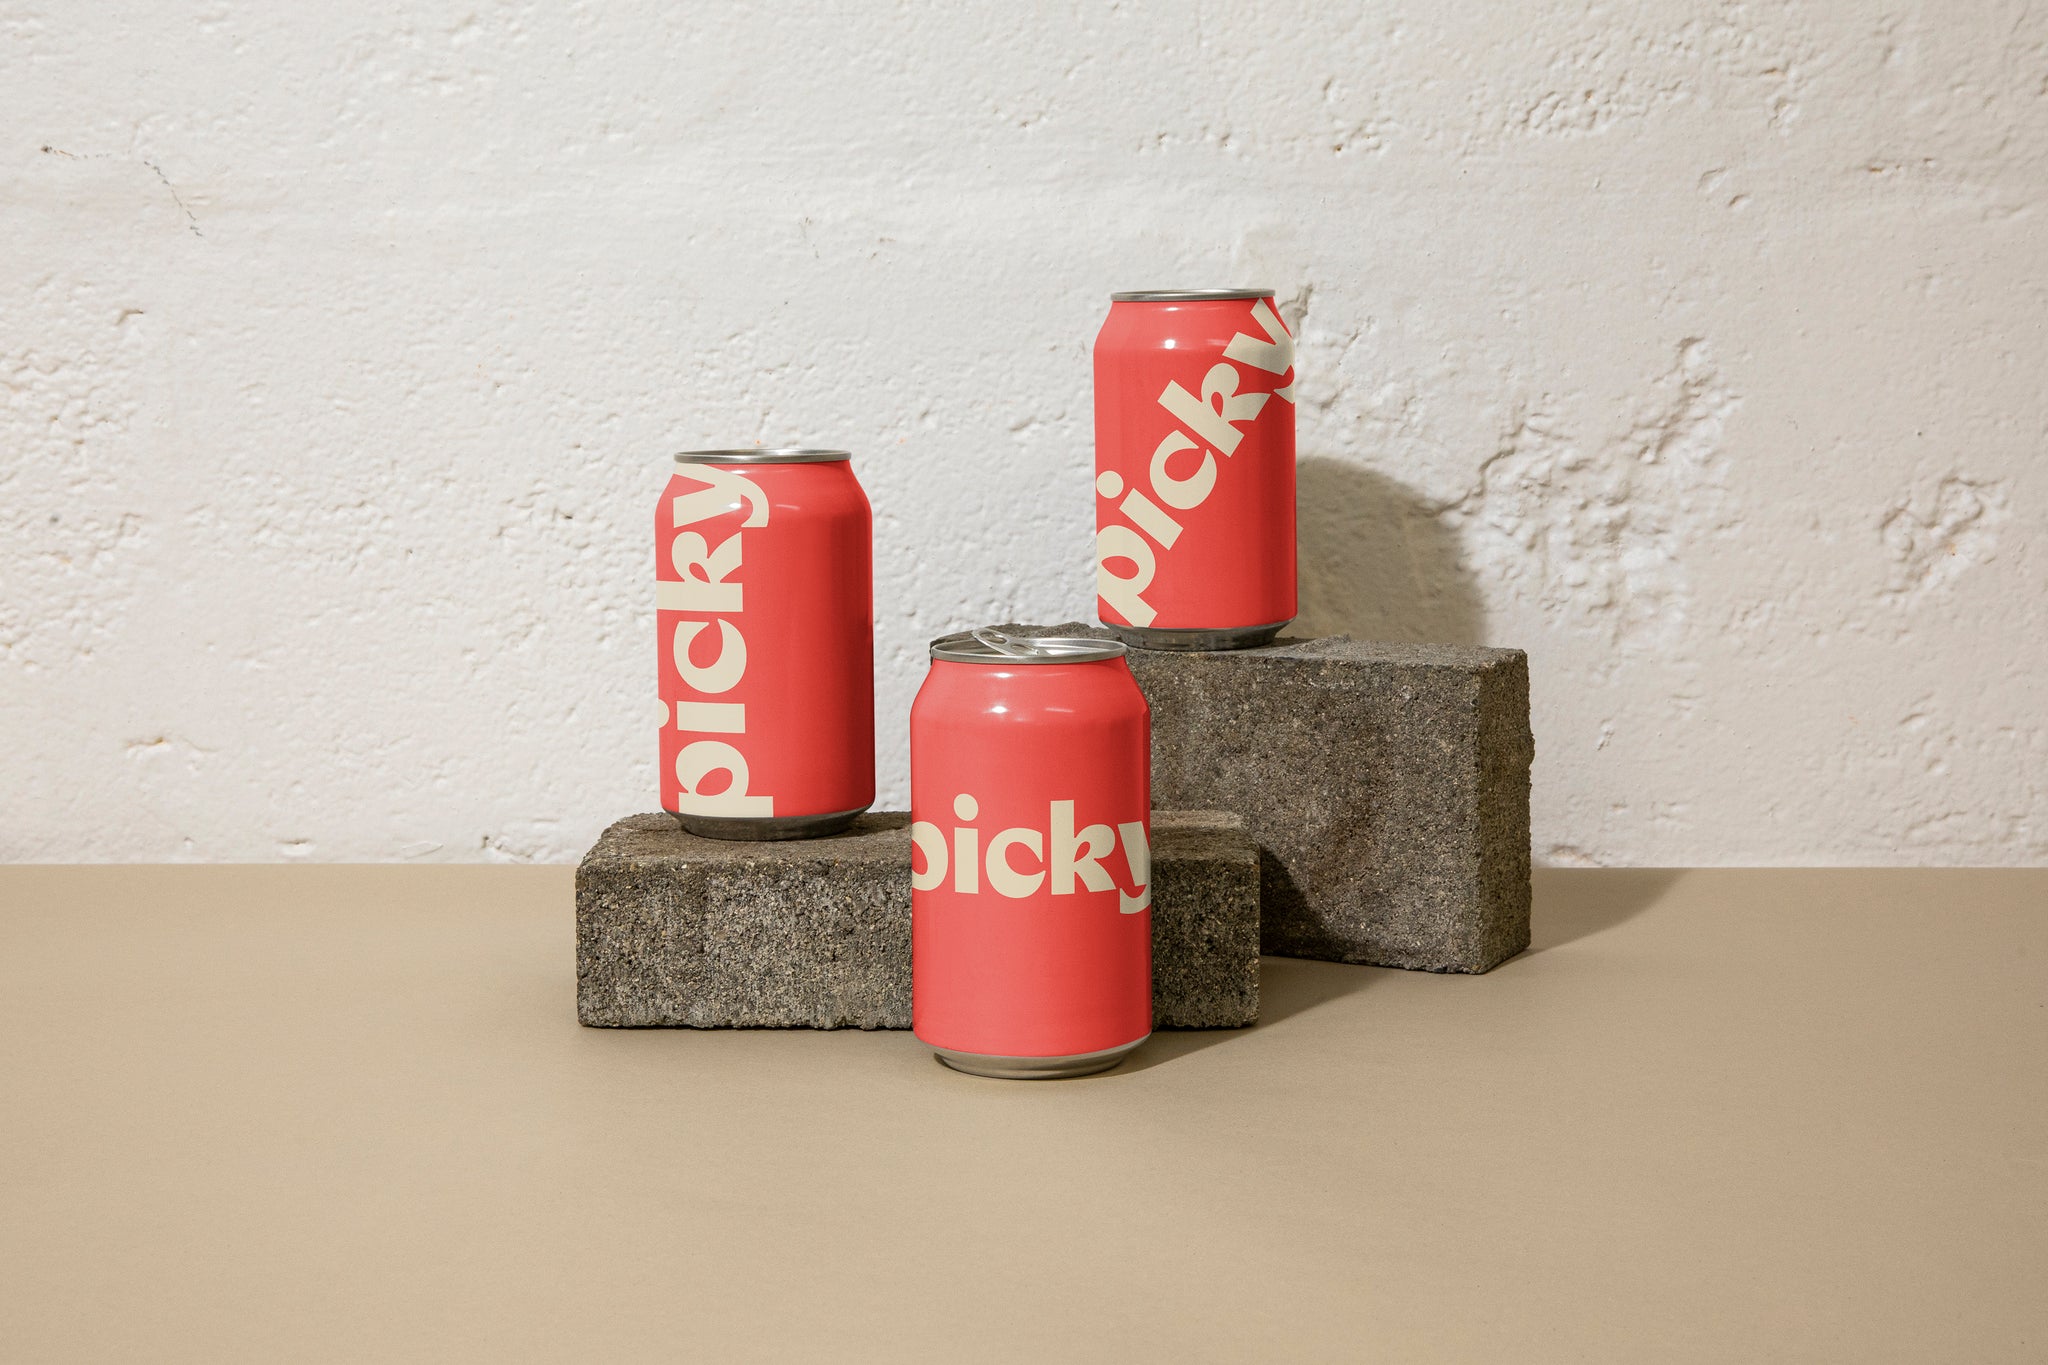 Landscape close-up of three 330ml cans posed atop grey bricks at different heights in front of a white brick wall; they are red with large white picky logo across the face.